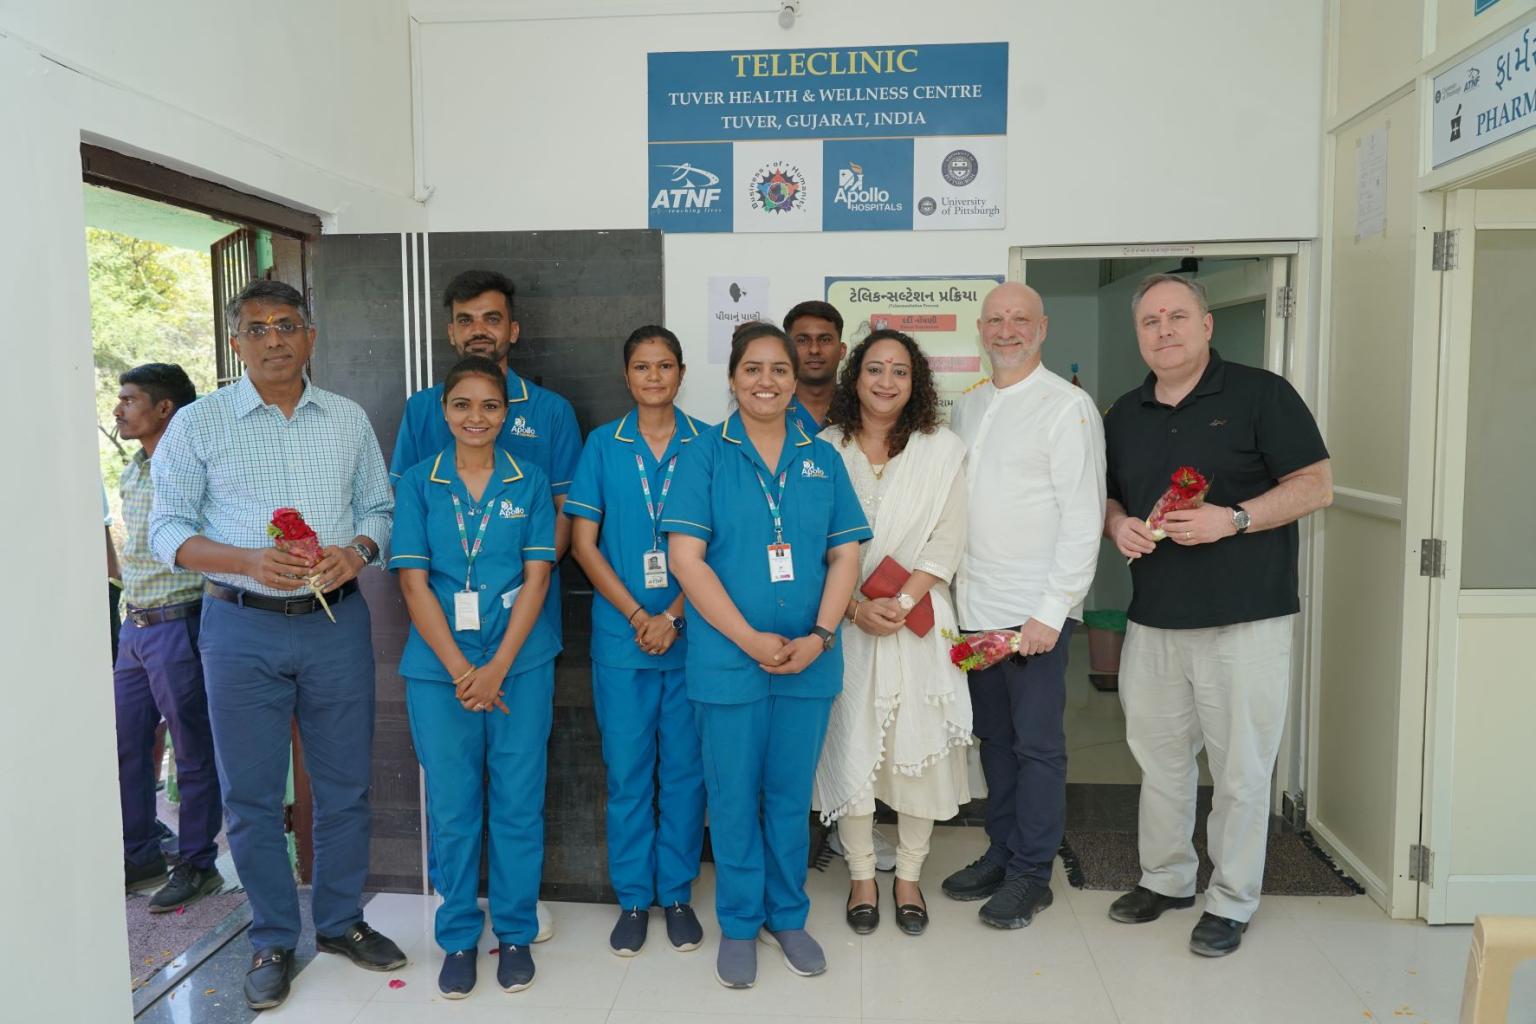 Ariel Armony and Tom O'Toole visit with the THWC staff in Gujarat, India